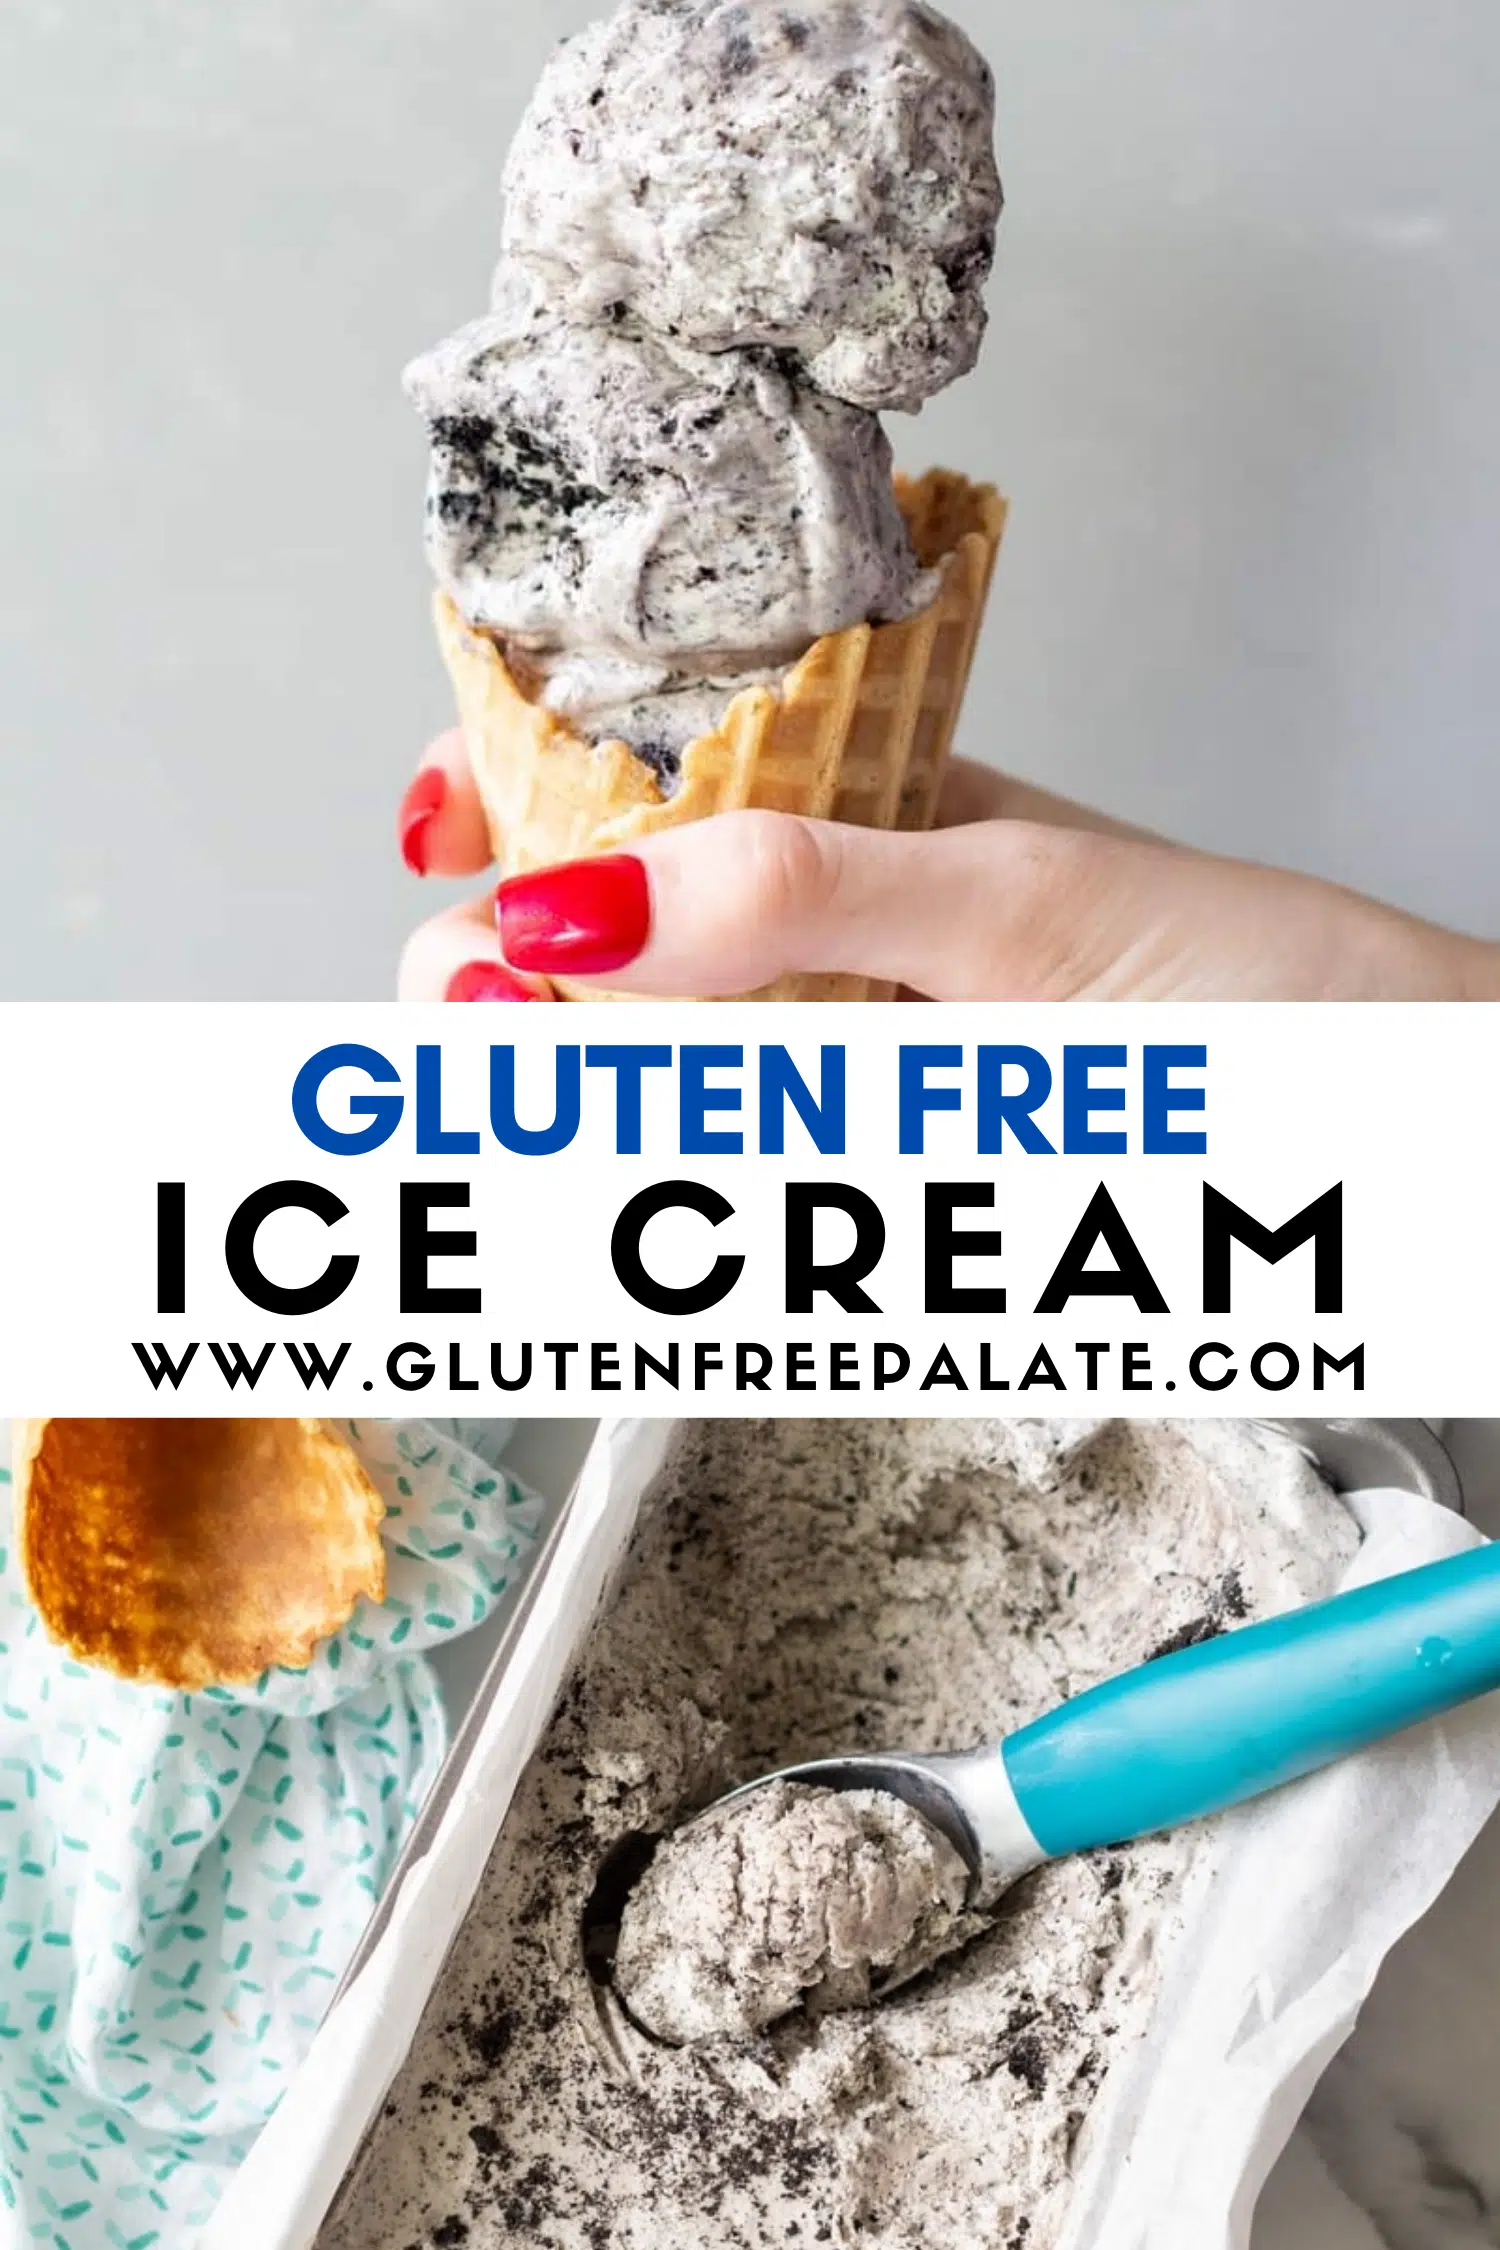 images of gluten free cookies and cream ice cream with a text overlay in the center